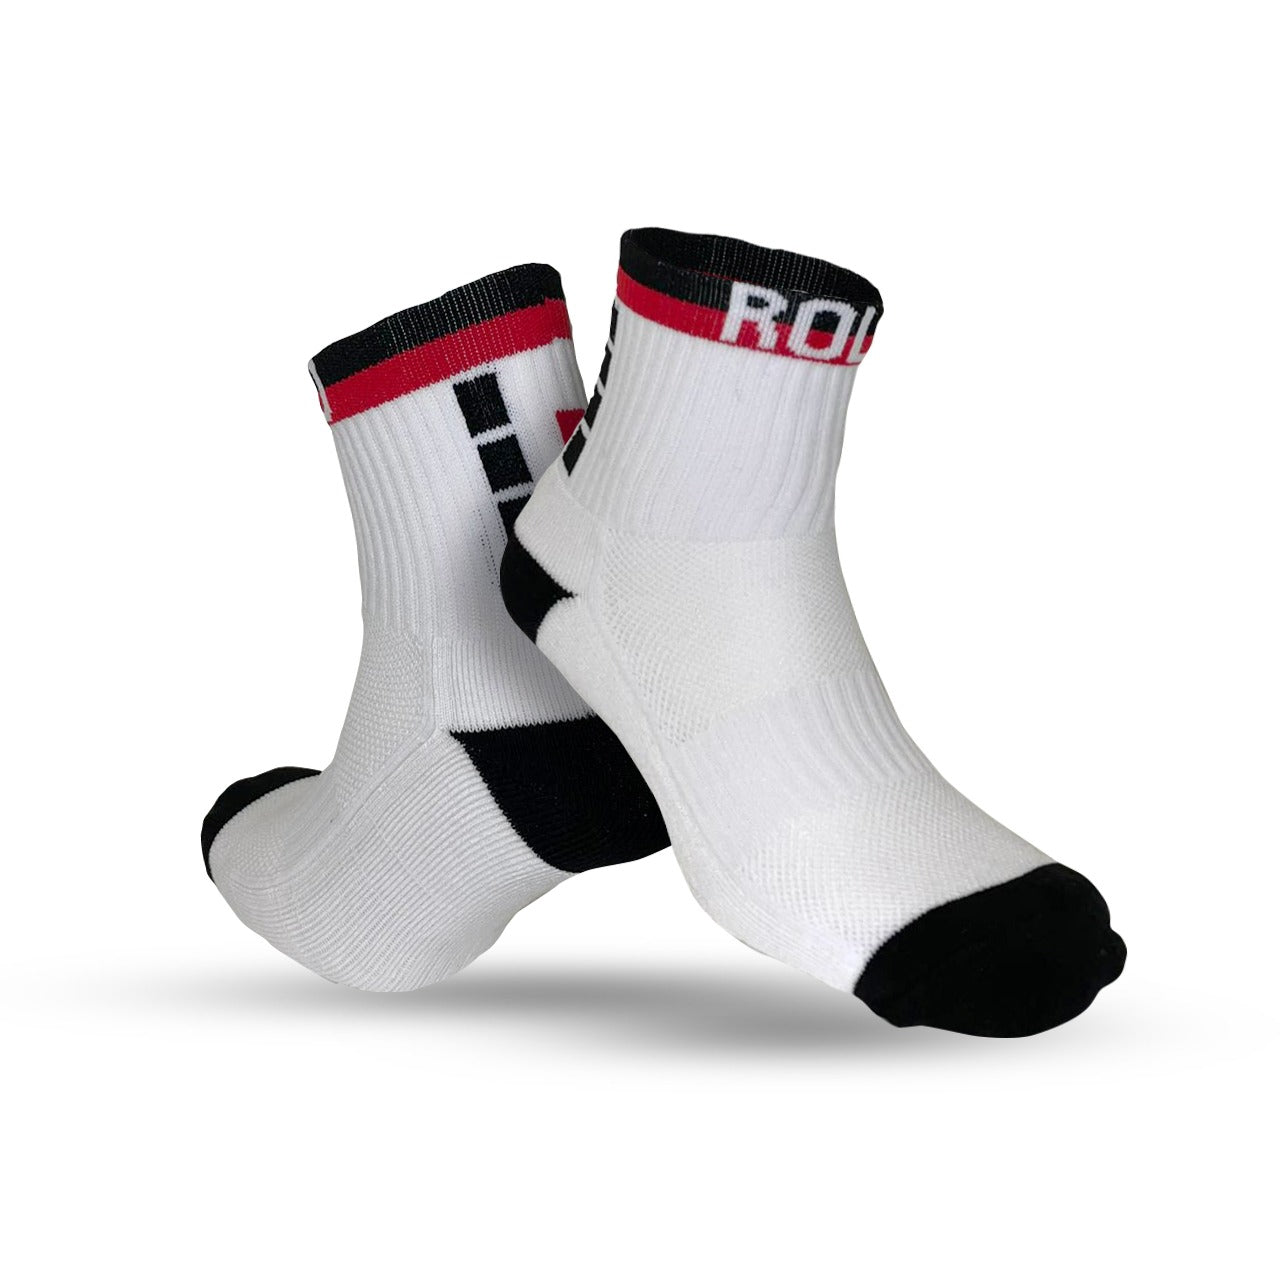 Low Rise Cushioned Ankle Socks - Black/Red/White